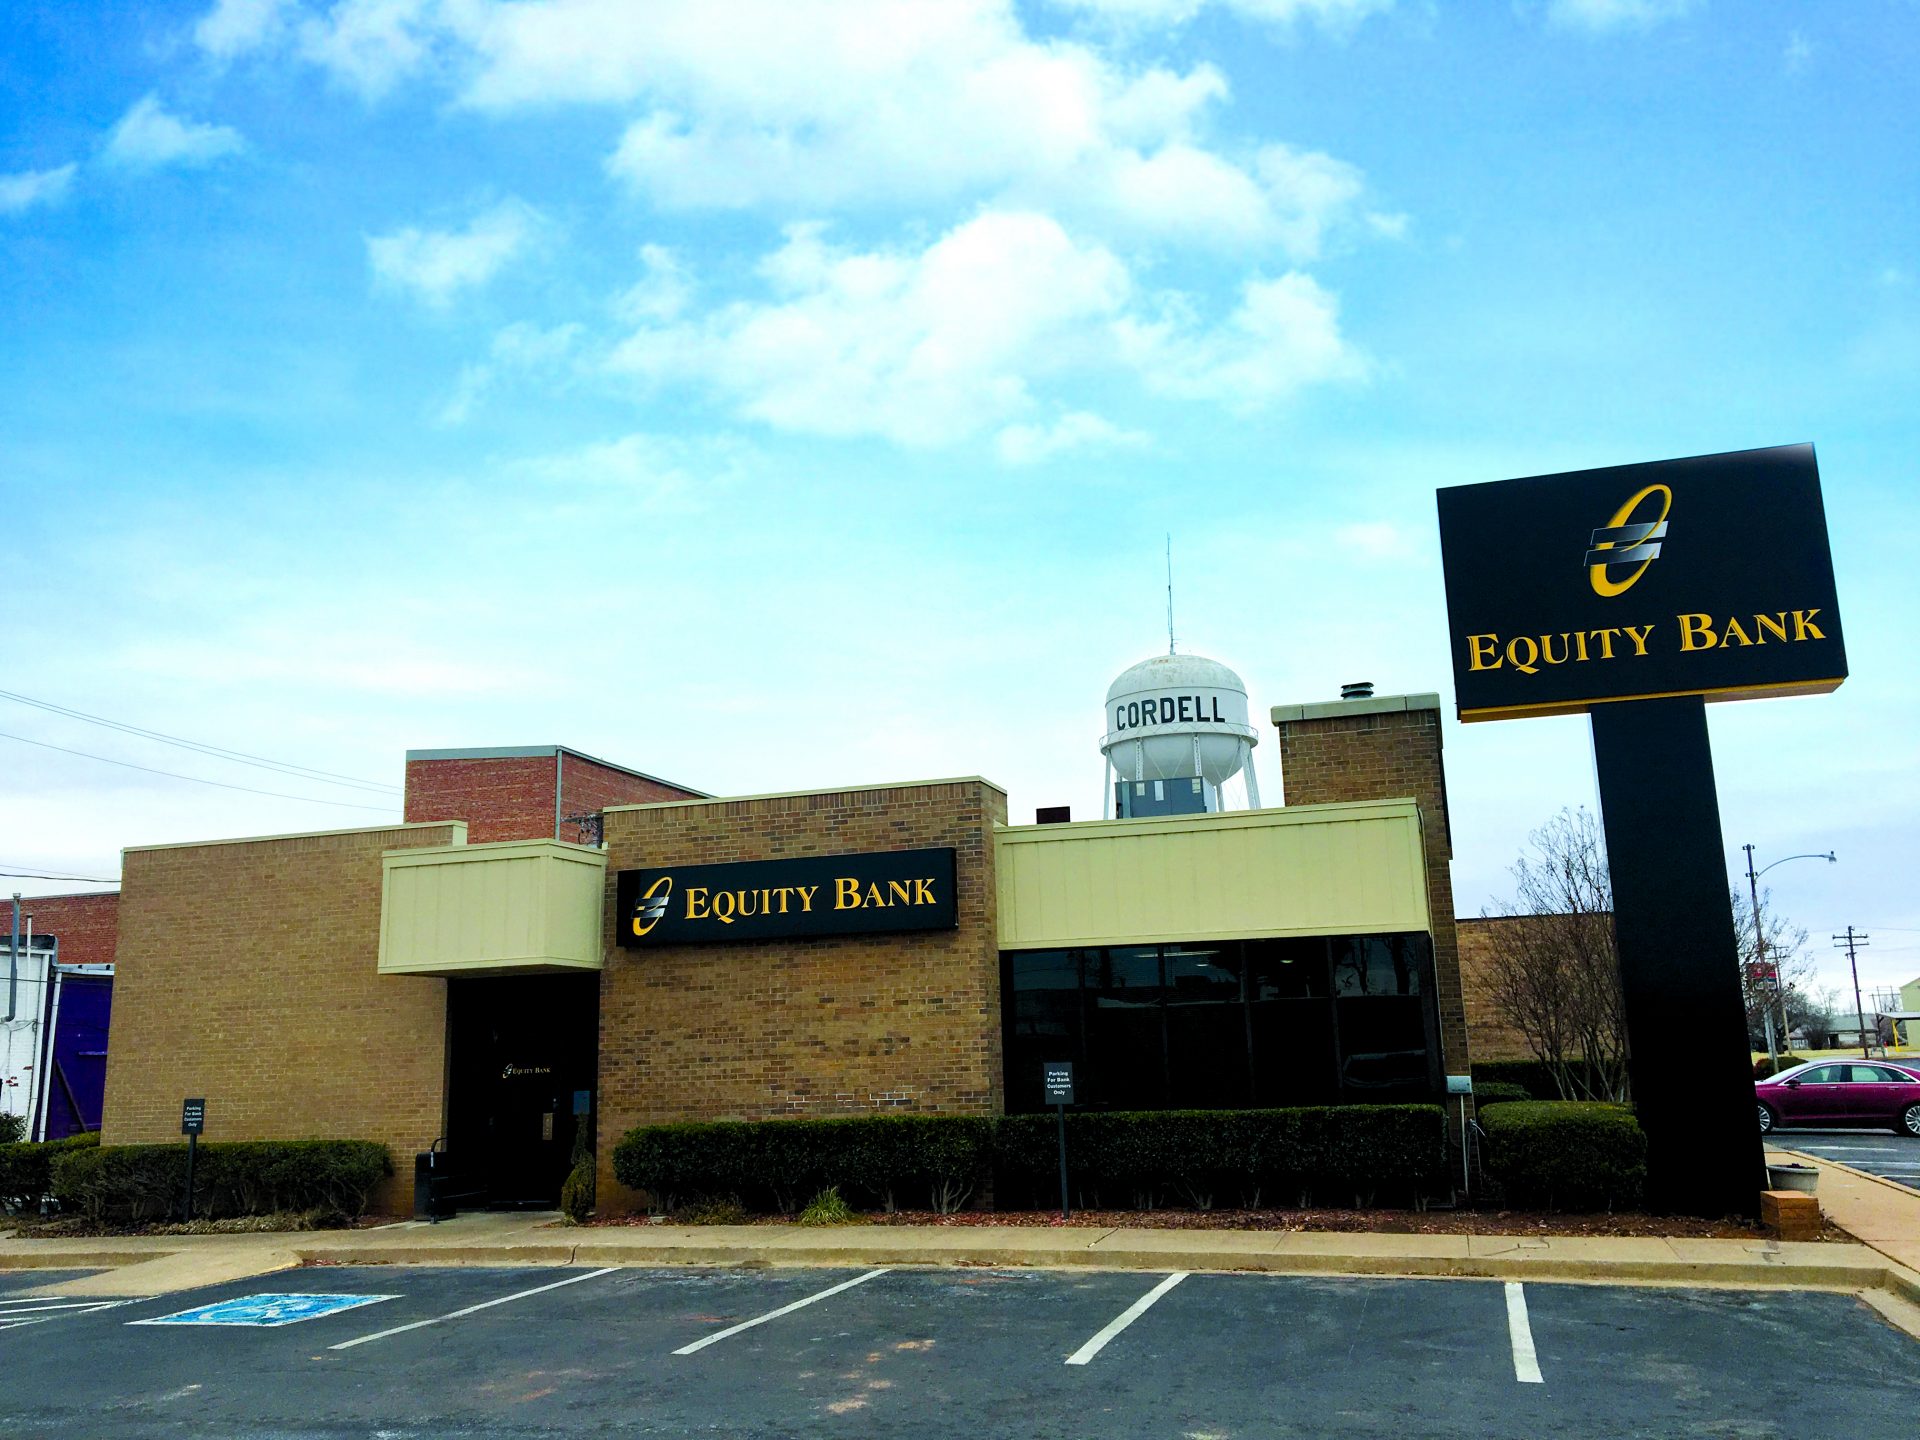 Equity Bank Cordell branch exterior.